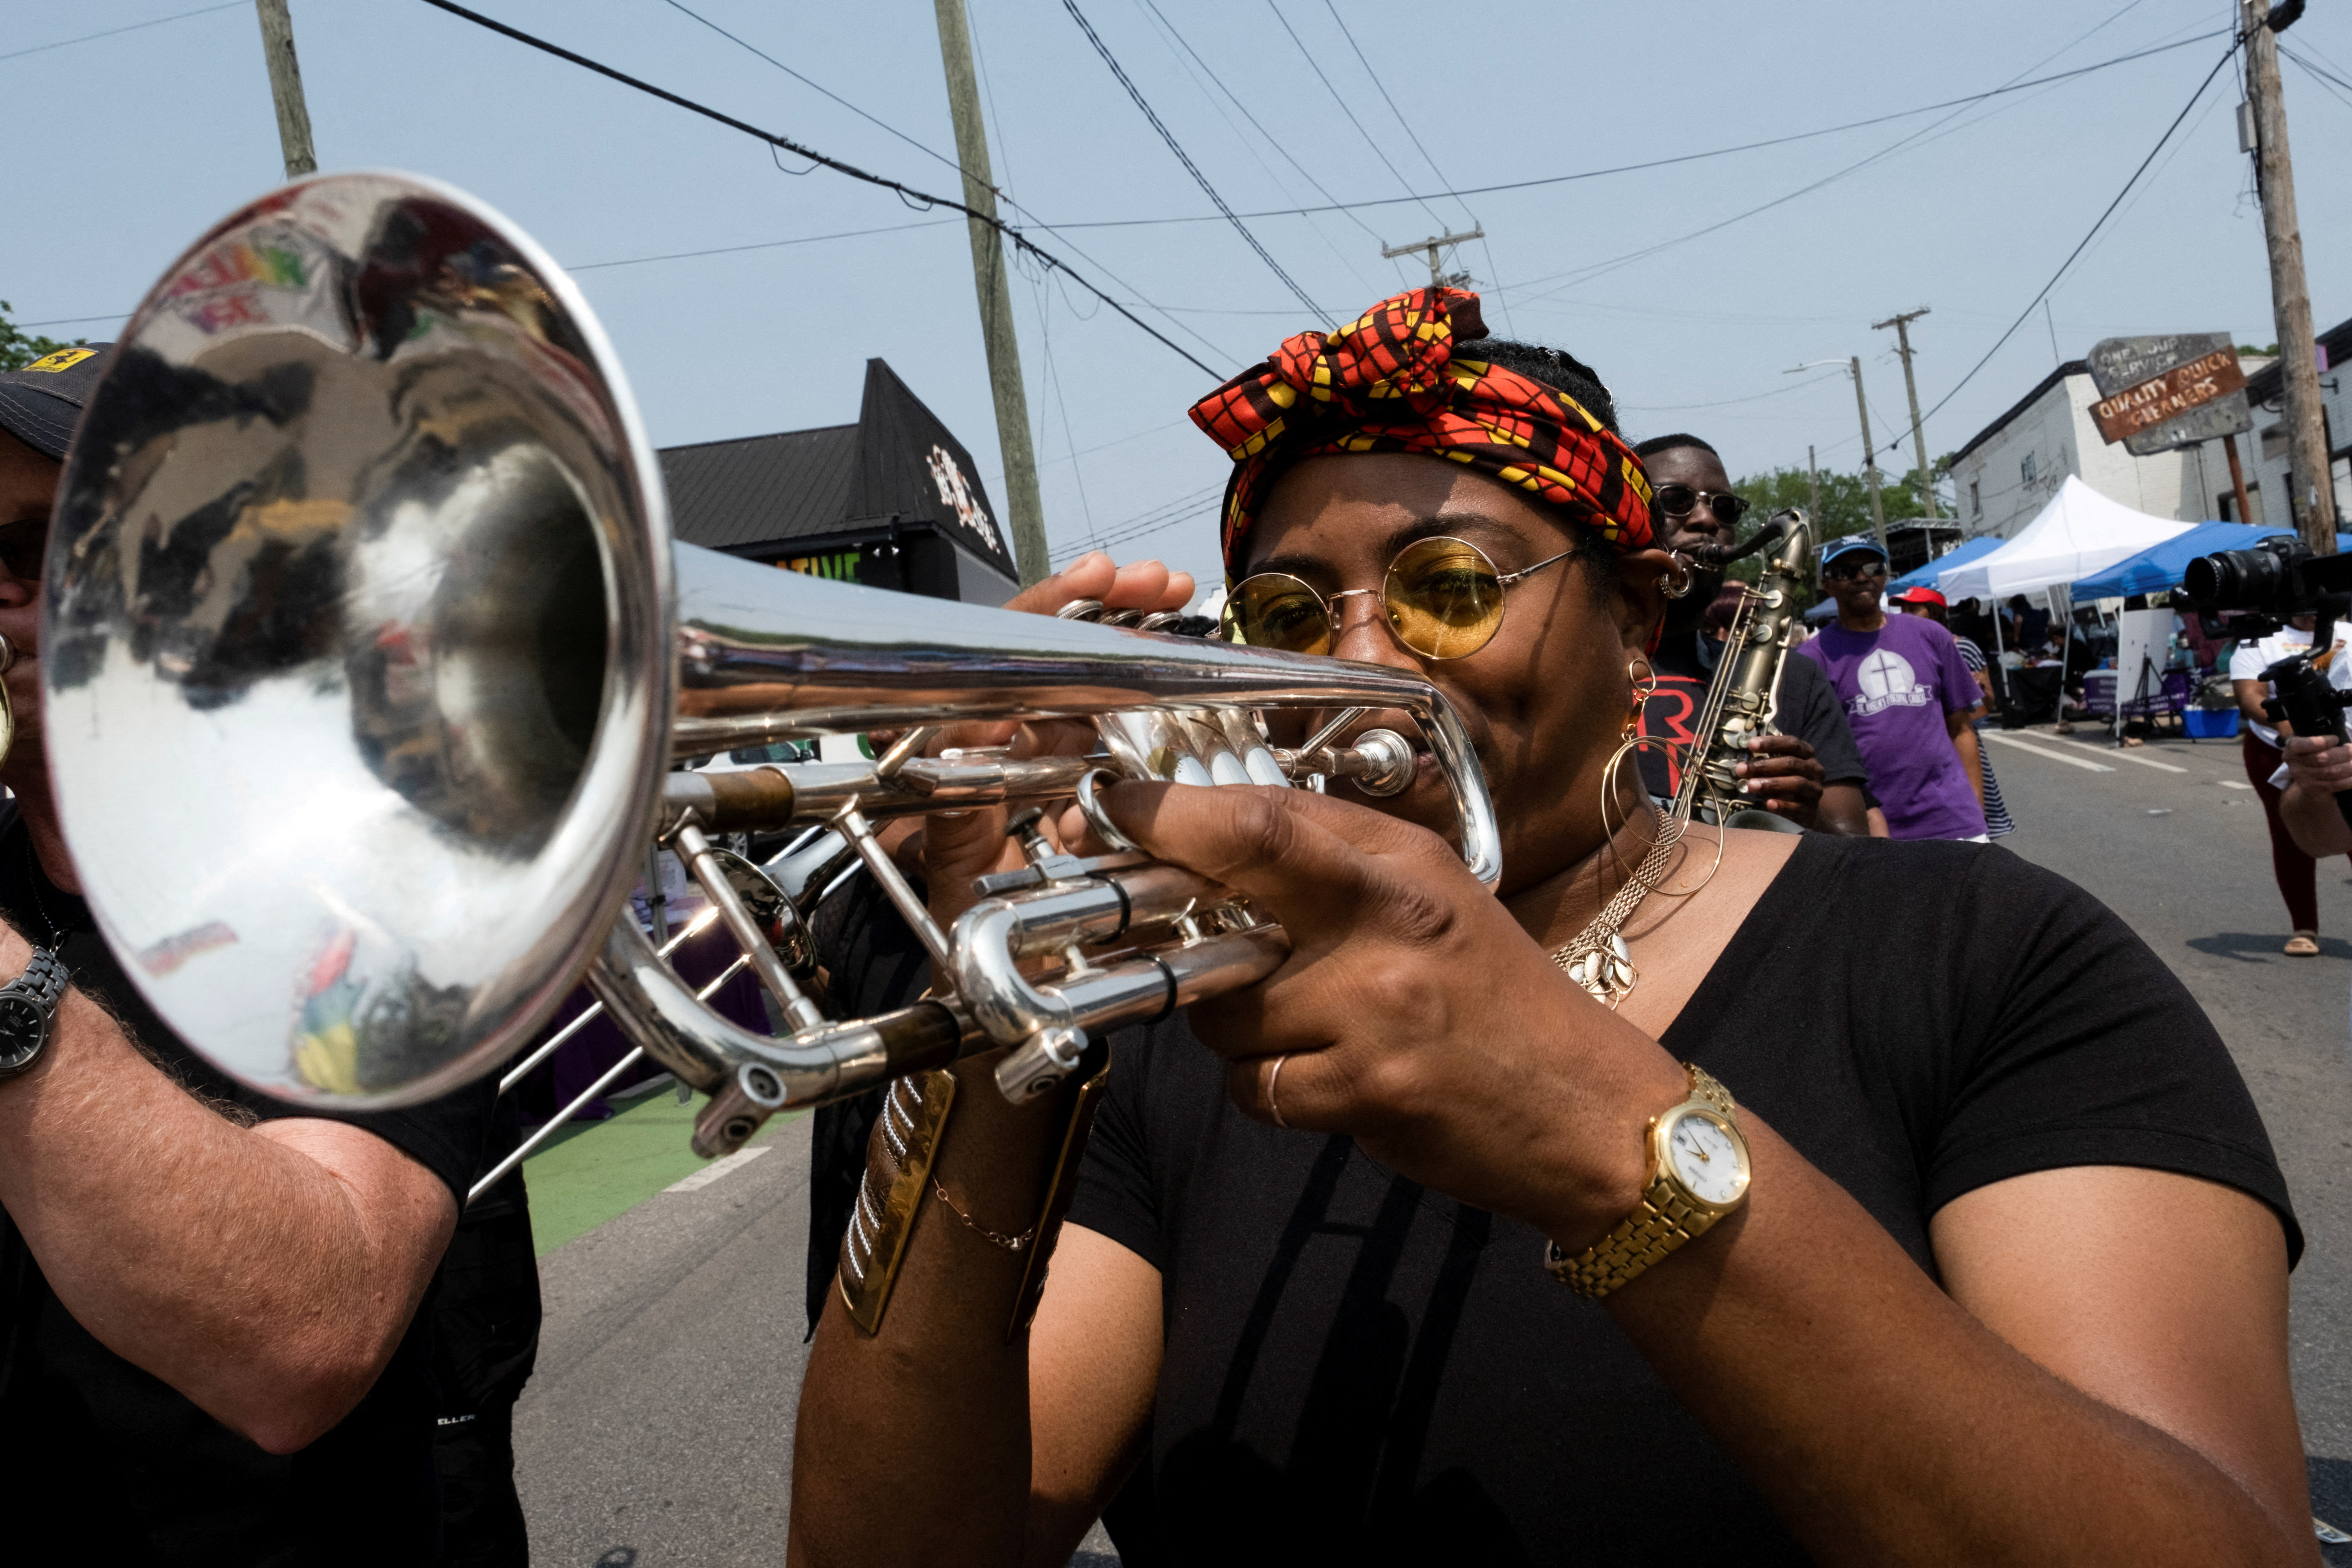 Residents attend a block party to mark Juneteenth in Nashville, Tennessee